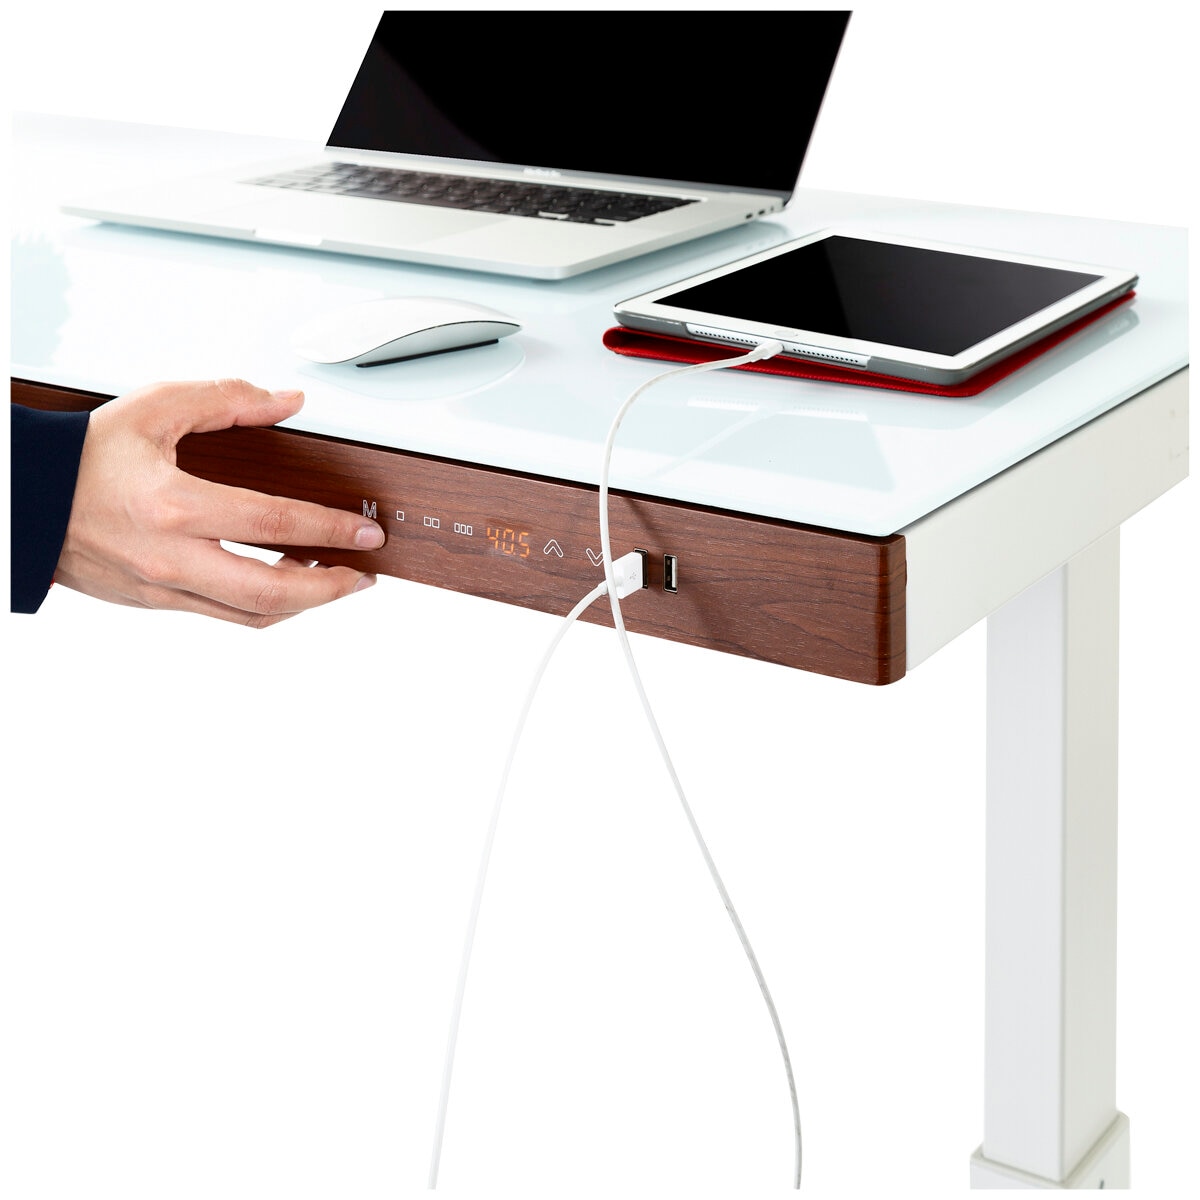 airLIFT Glass Top Electric Height-Adjustable Standing Desk White